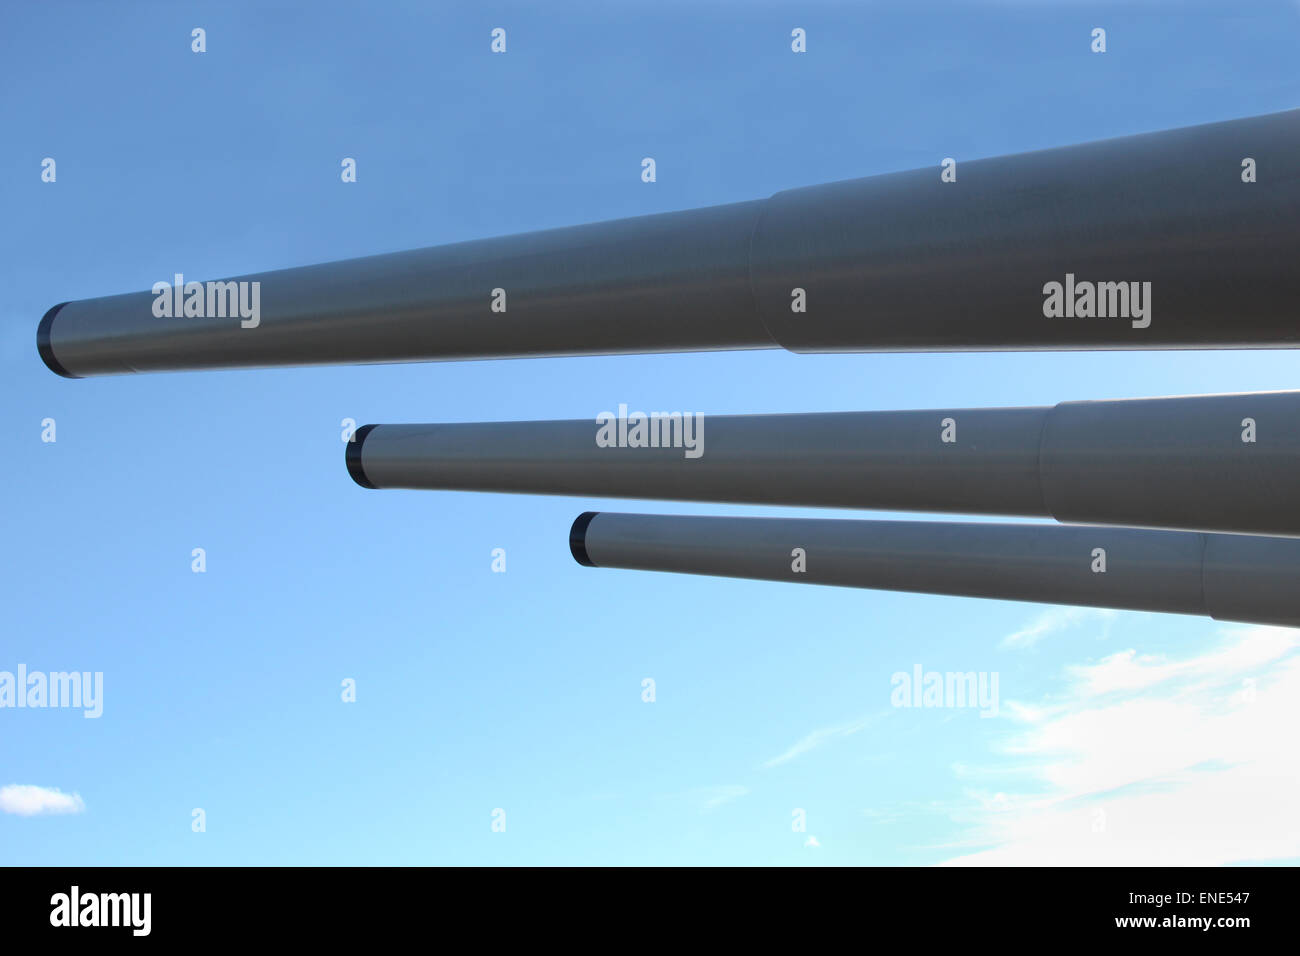 Three 16 inch guns similar to those used on US Navy warships in World War II and Korea. Stock Photo